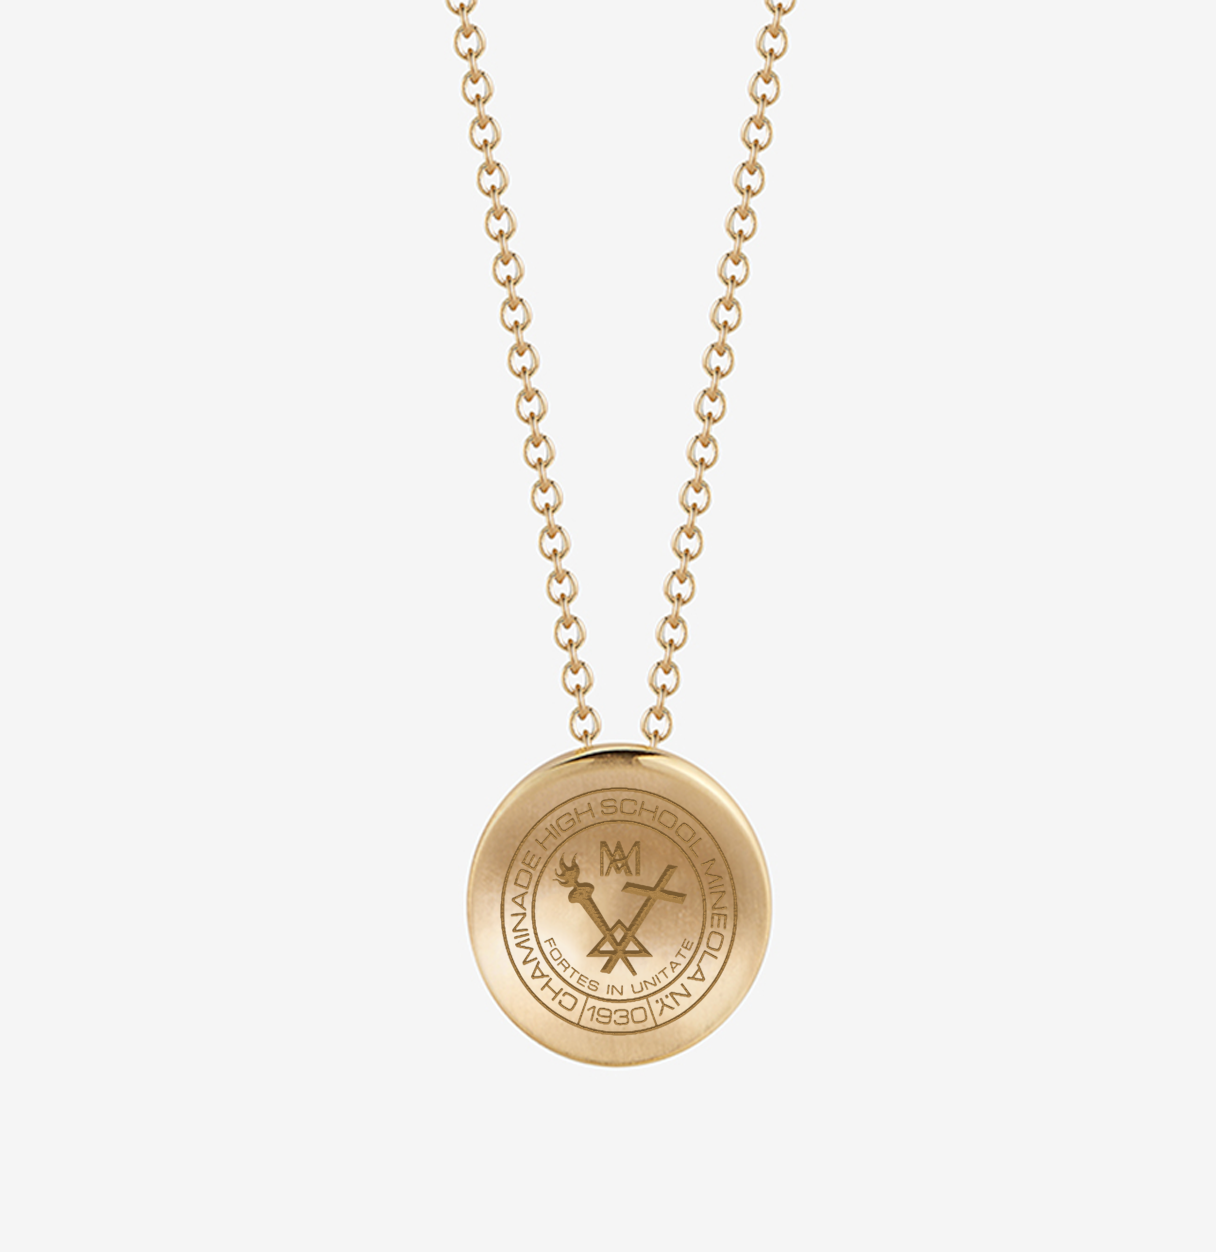 Kyle Cavan Organic Necklace - Chaminade Crest (small thumbprint curved)